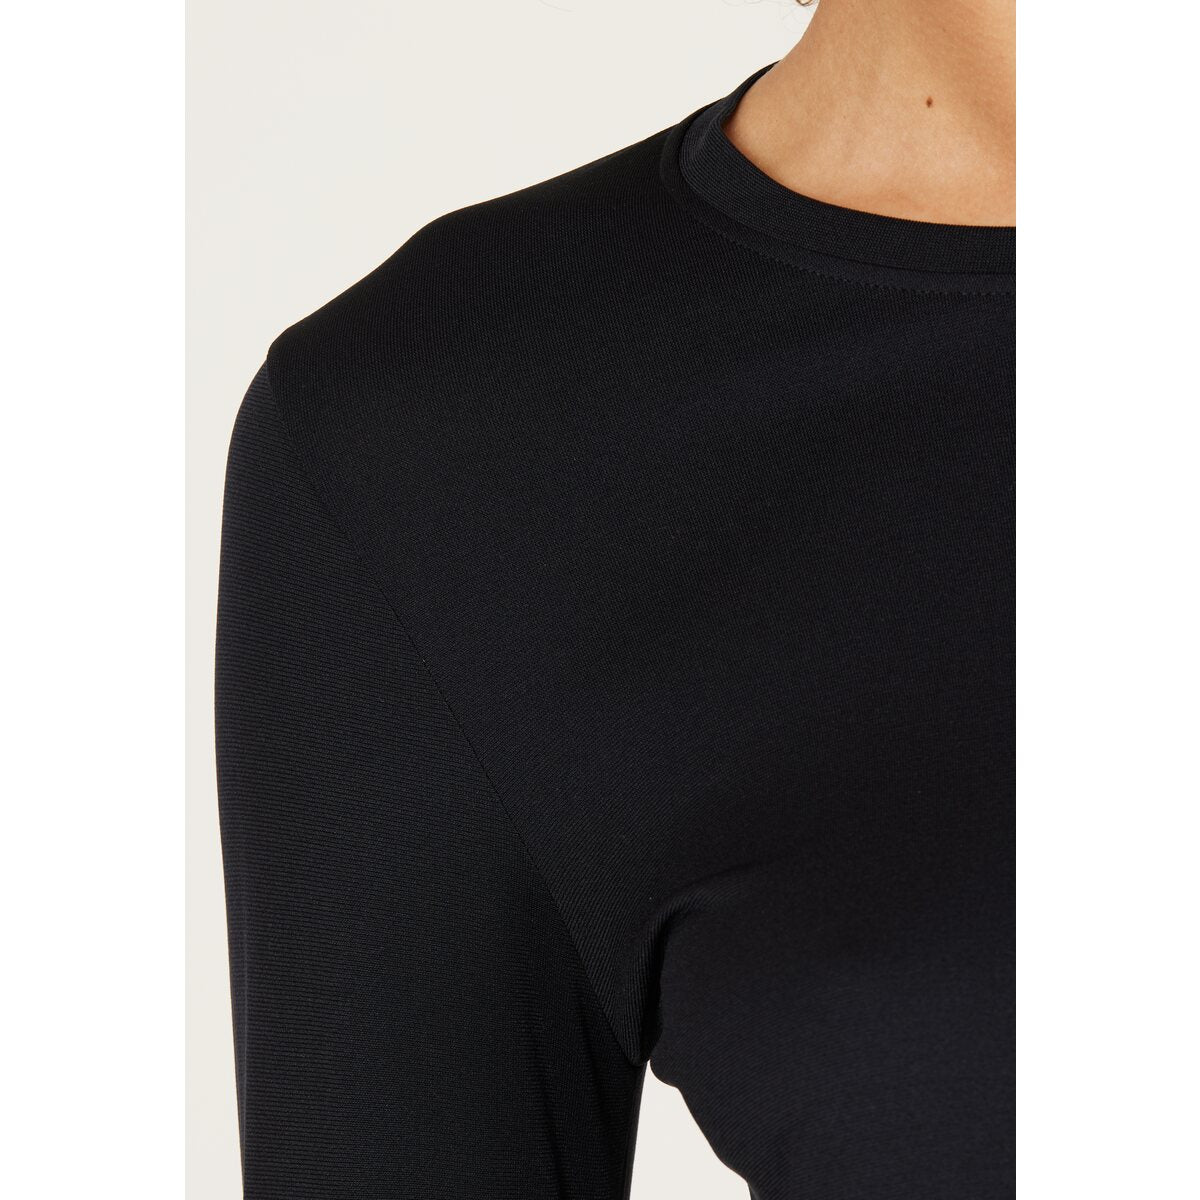 Athlecia Julee Womenswear Loose Fit Long Sleeve Seamless Tee - Black 4 Shaws Department Stores